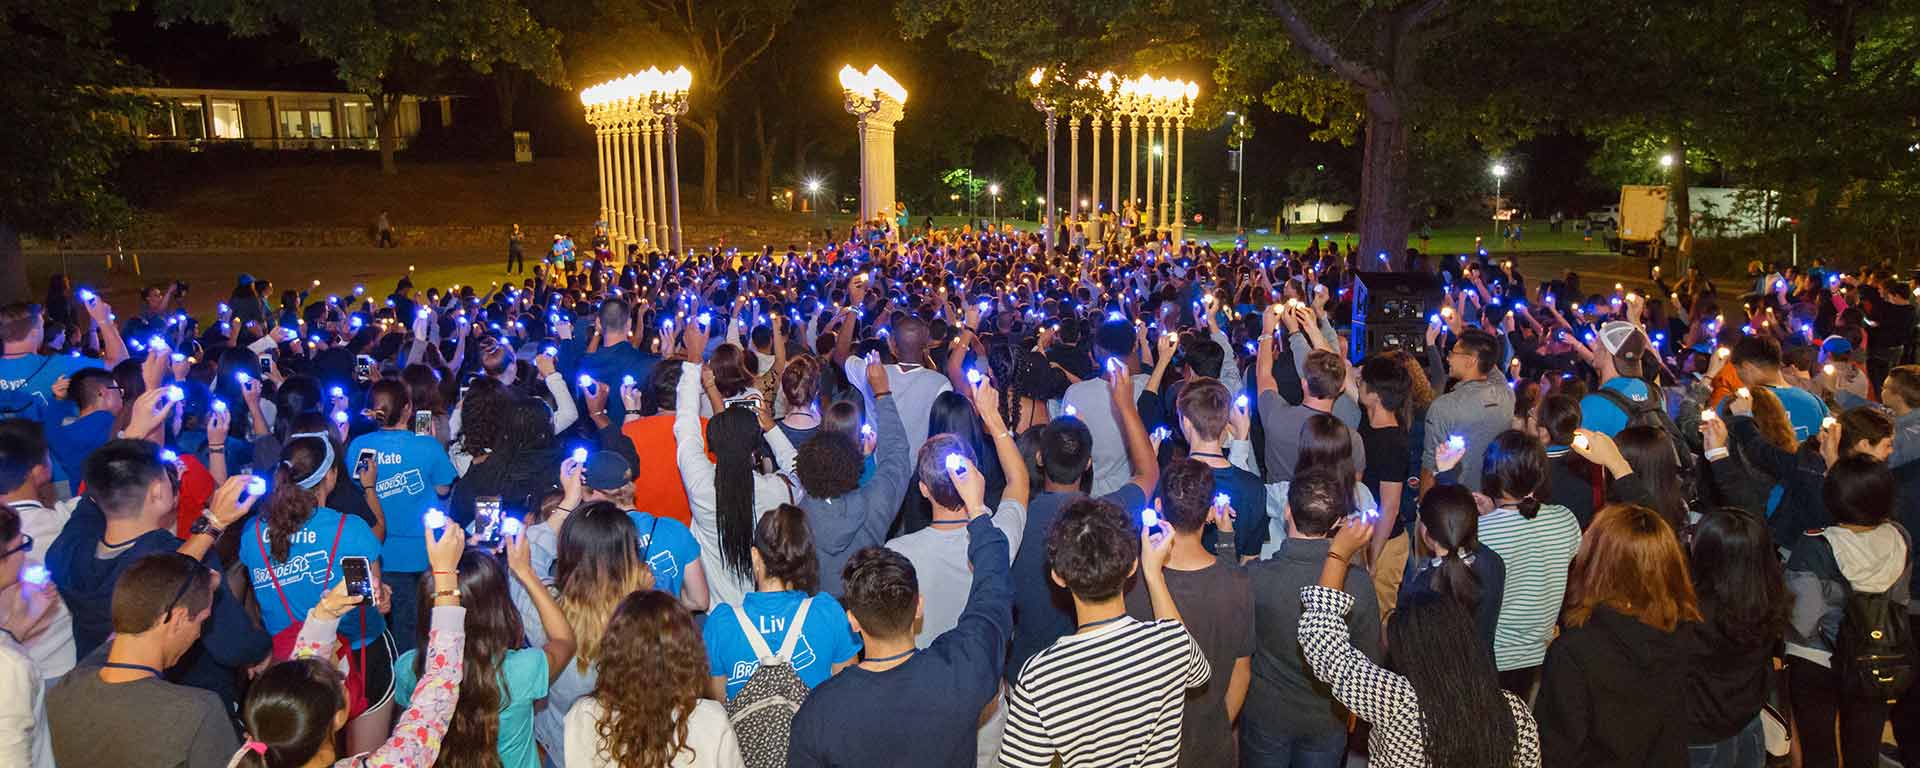 Students stand at night with hands raised, looking at the Light of Reason statue